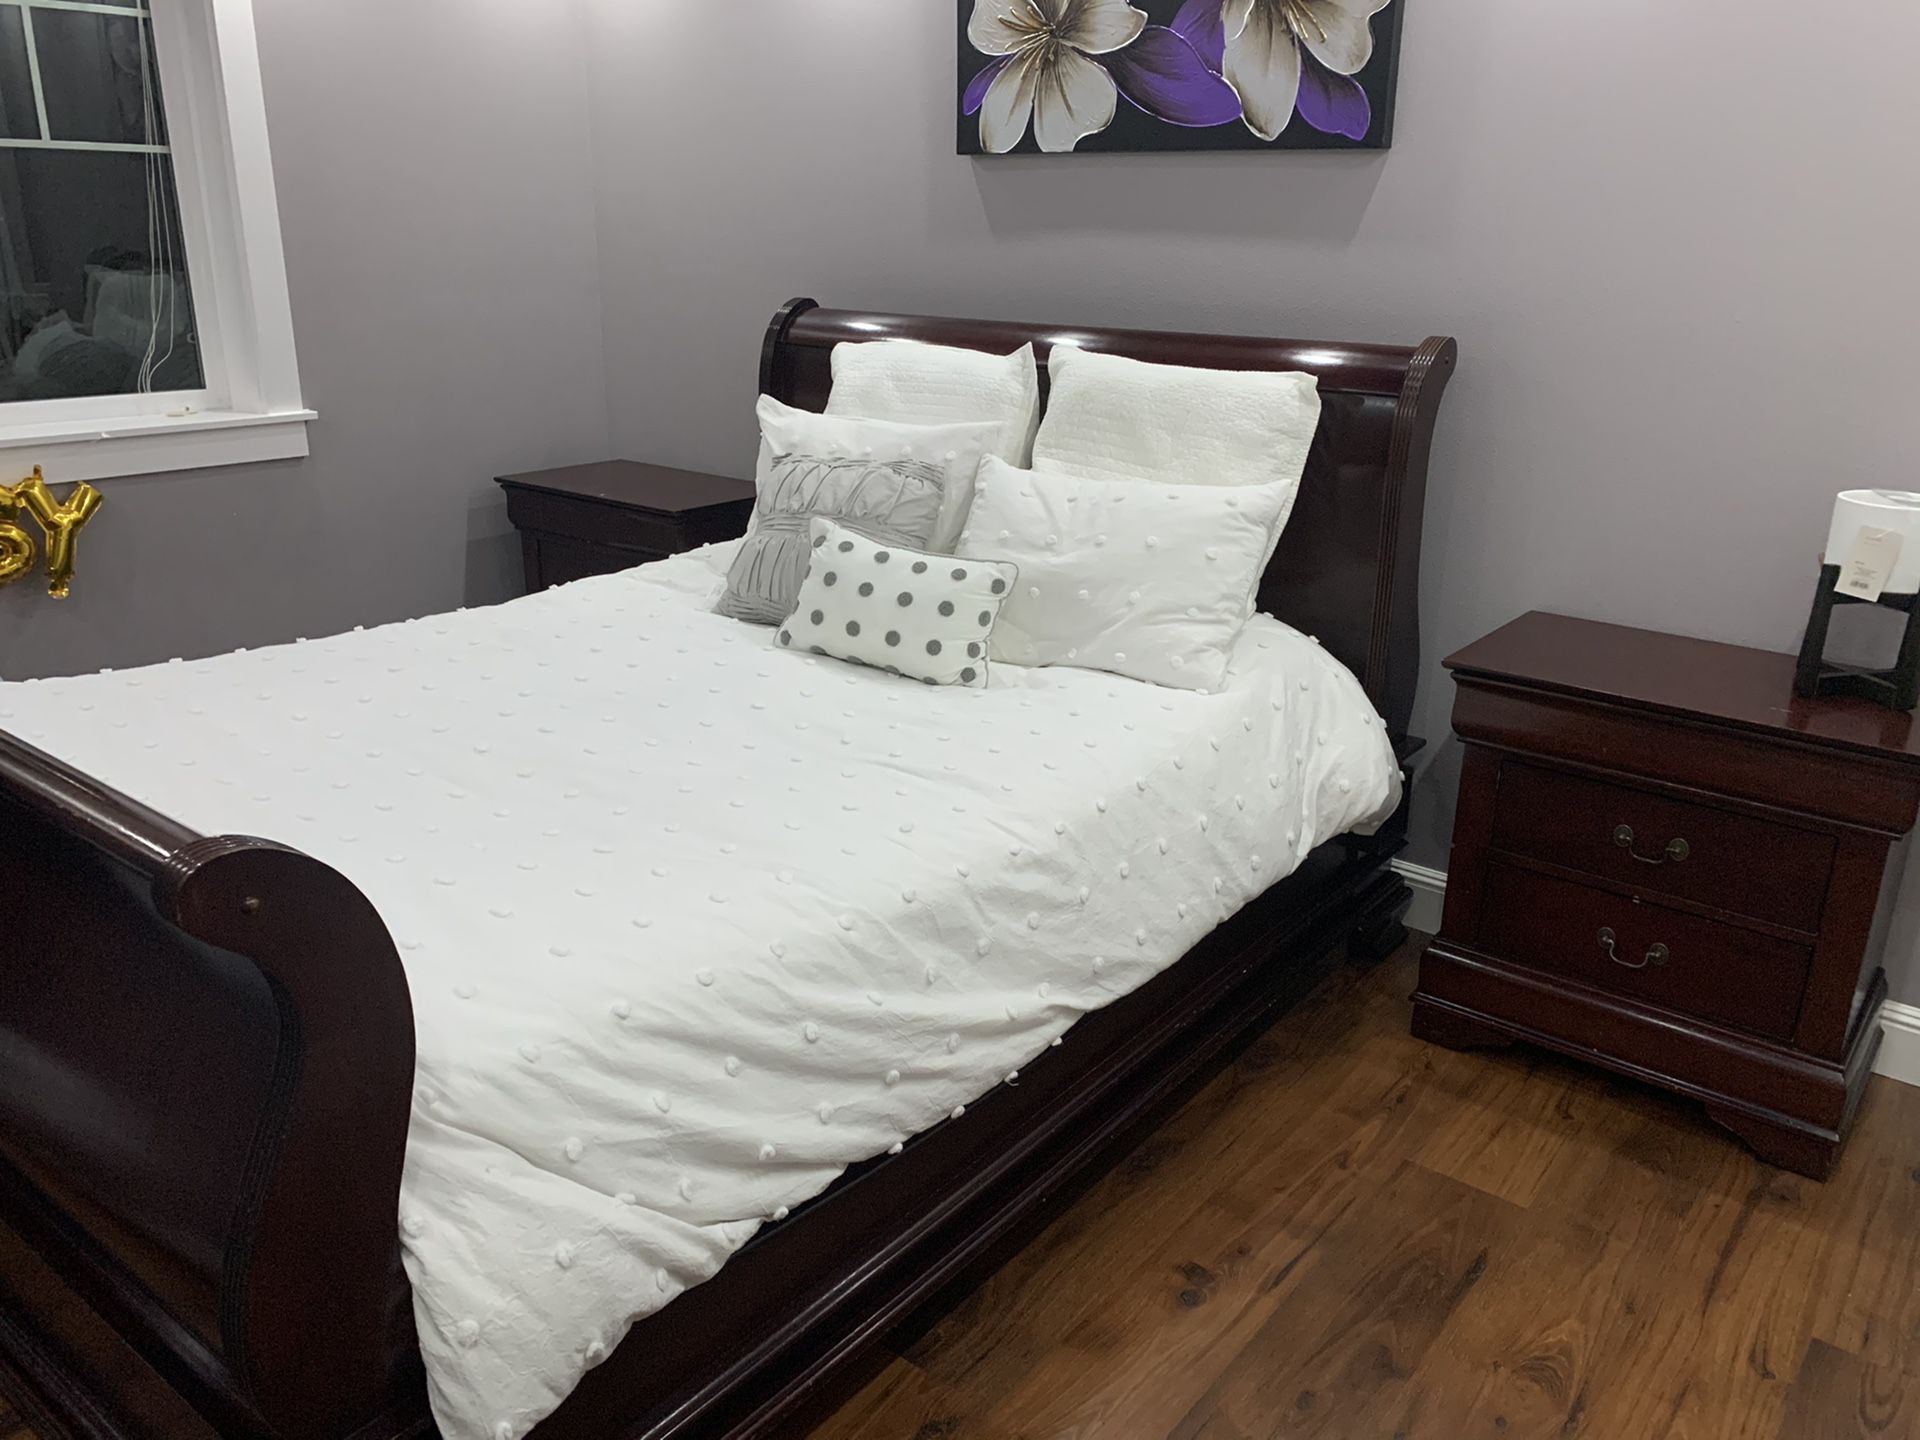 Queen bed with nightstands and mattress